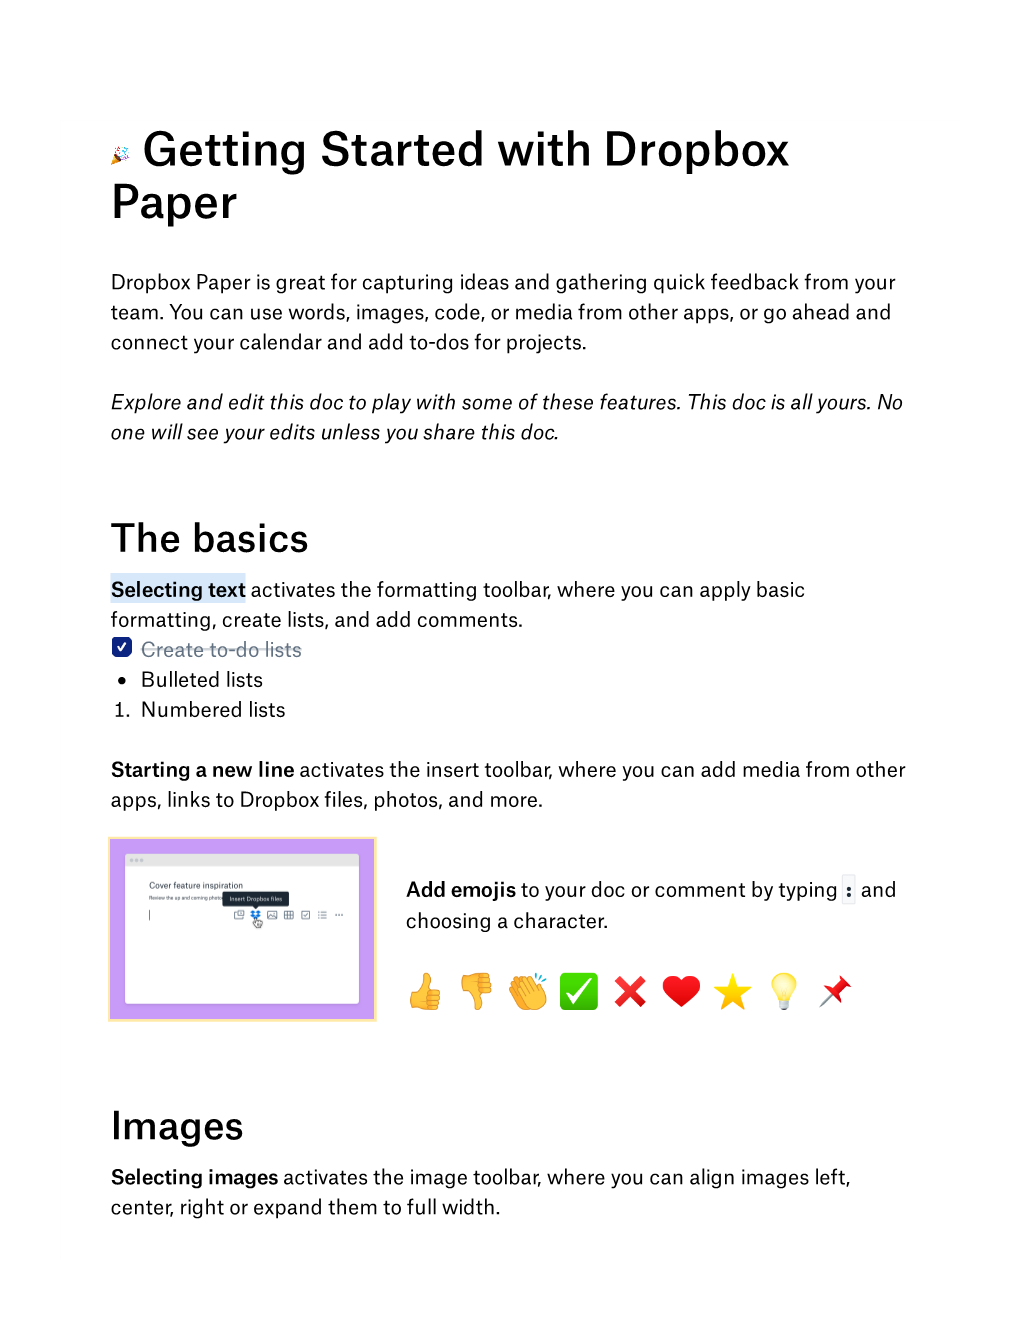 Getting Started with Dropbox Paper